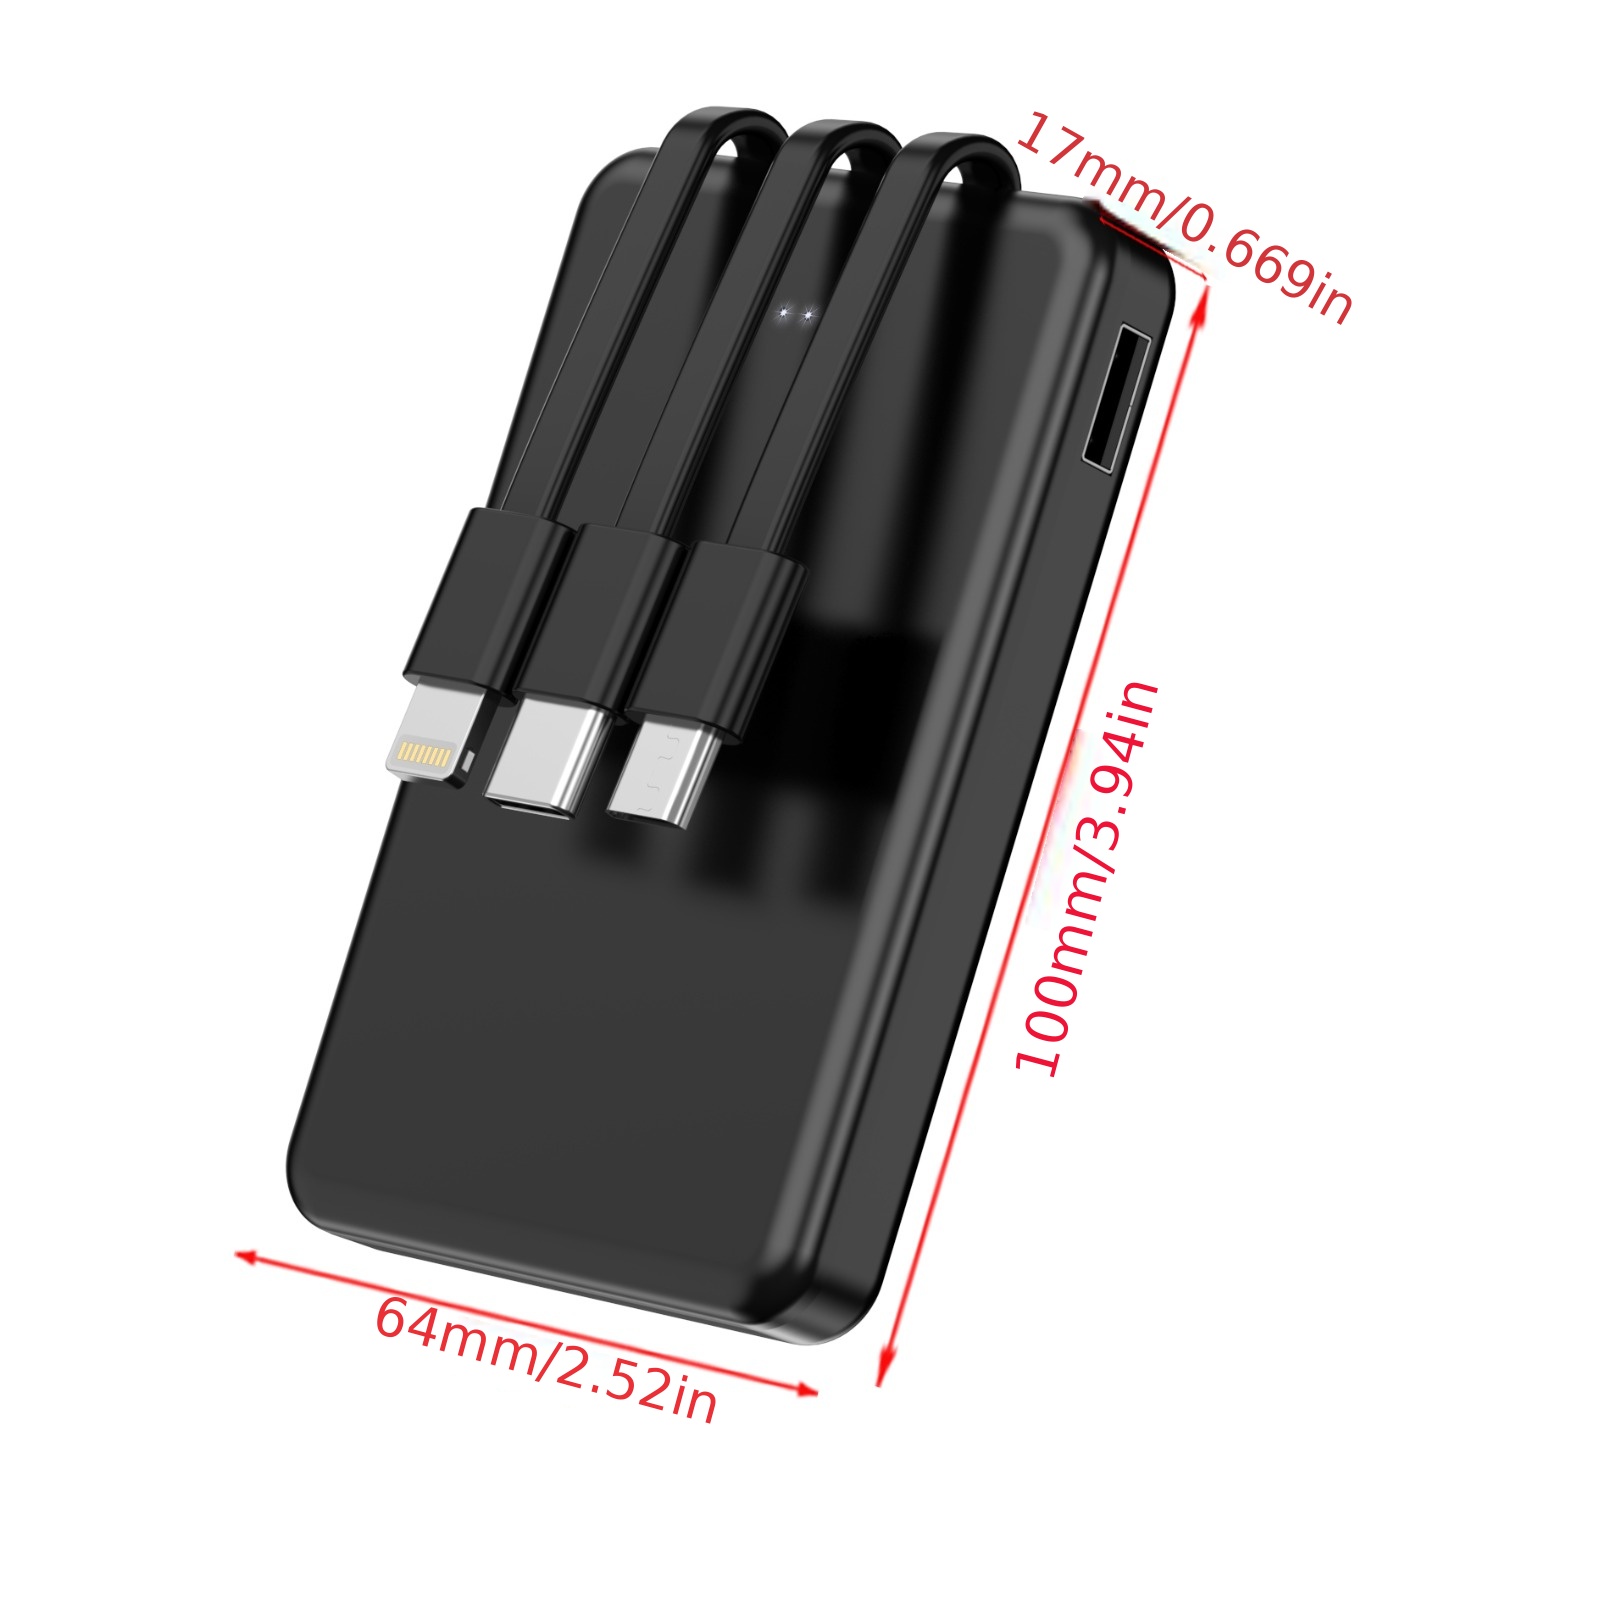 portable mobile phone charger built in cable mini mobile power supply slim and lightweight usb battery pack external mobile phone charger for samsung for iphone for ipad etc details 0